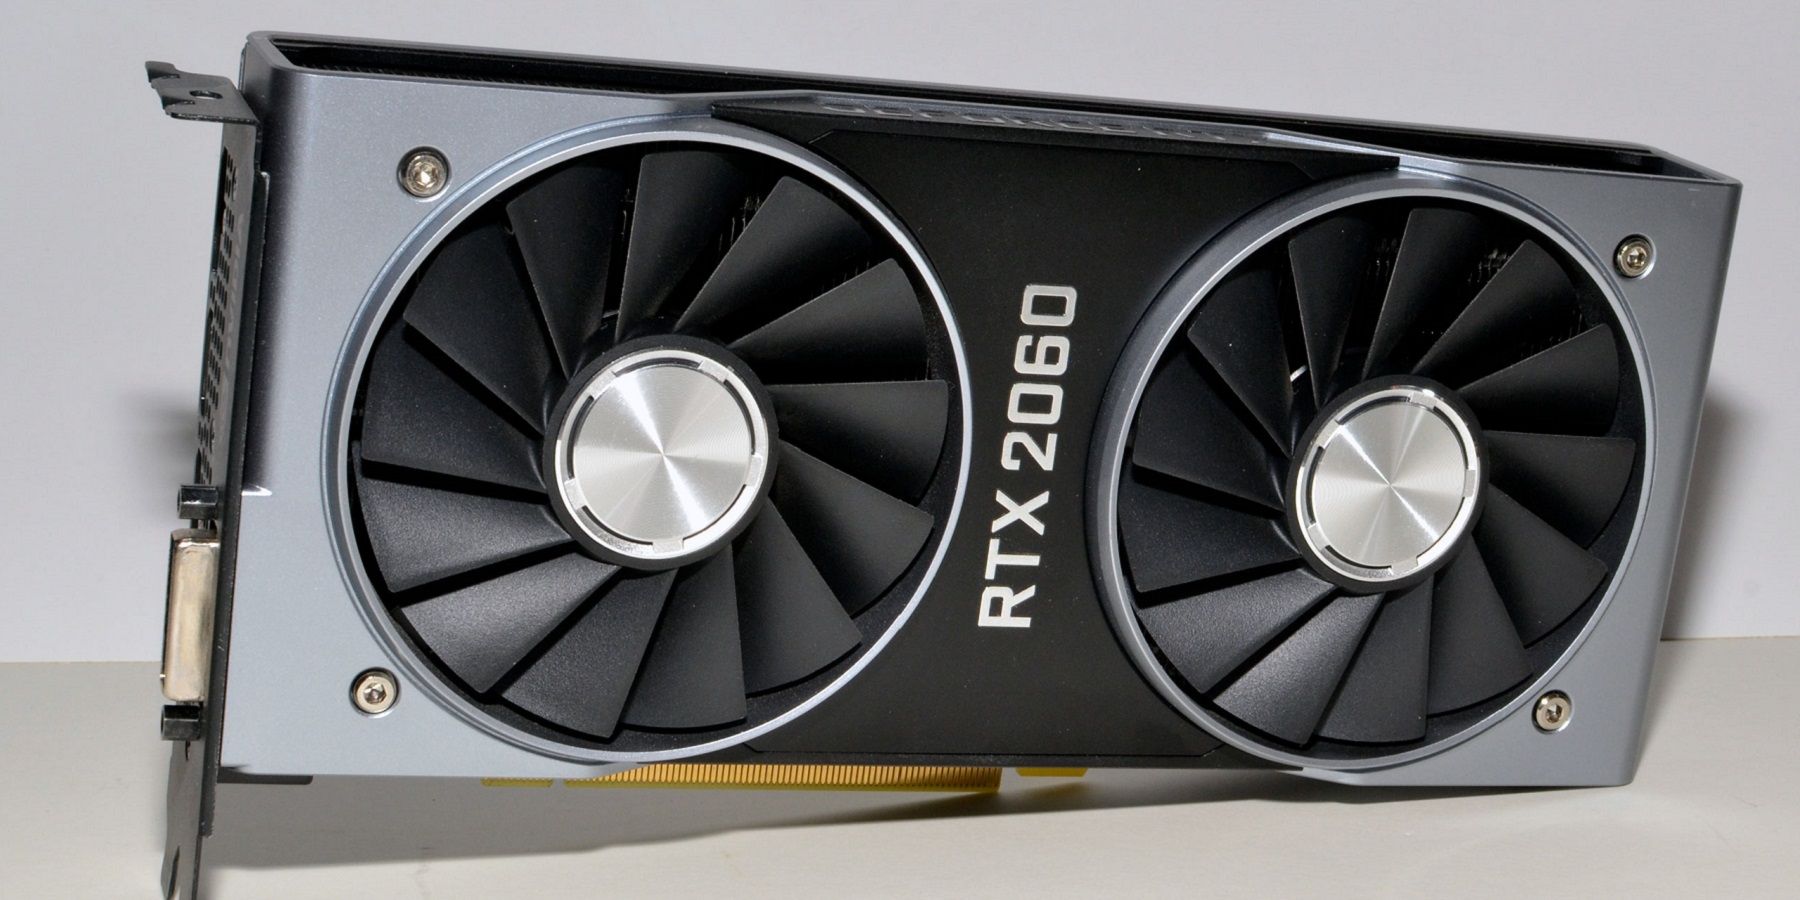 Photo of an Nvidia RTX 2060 graphics card on a plain background.